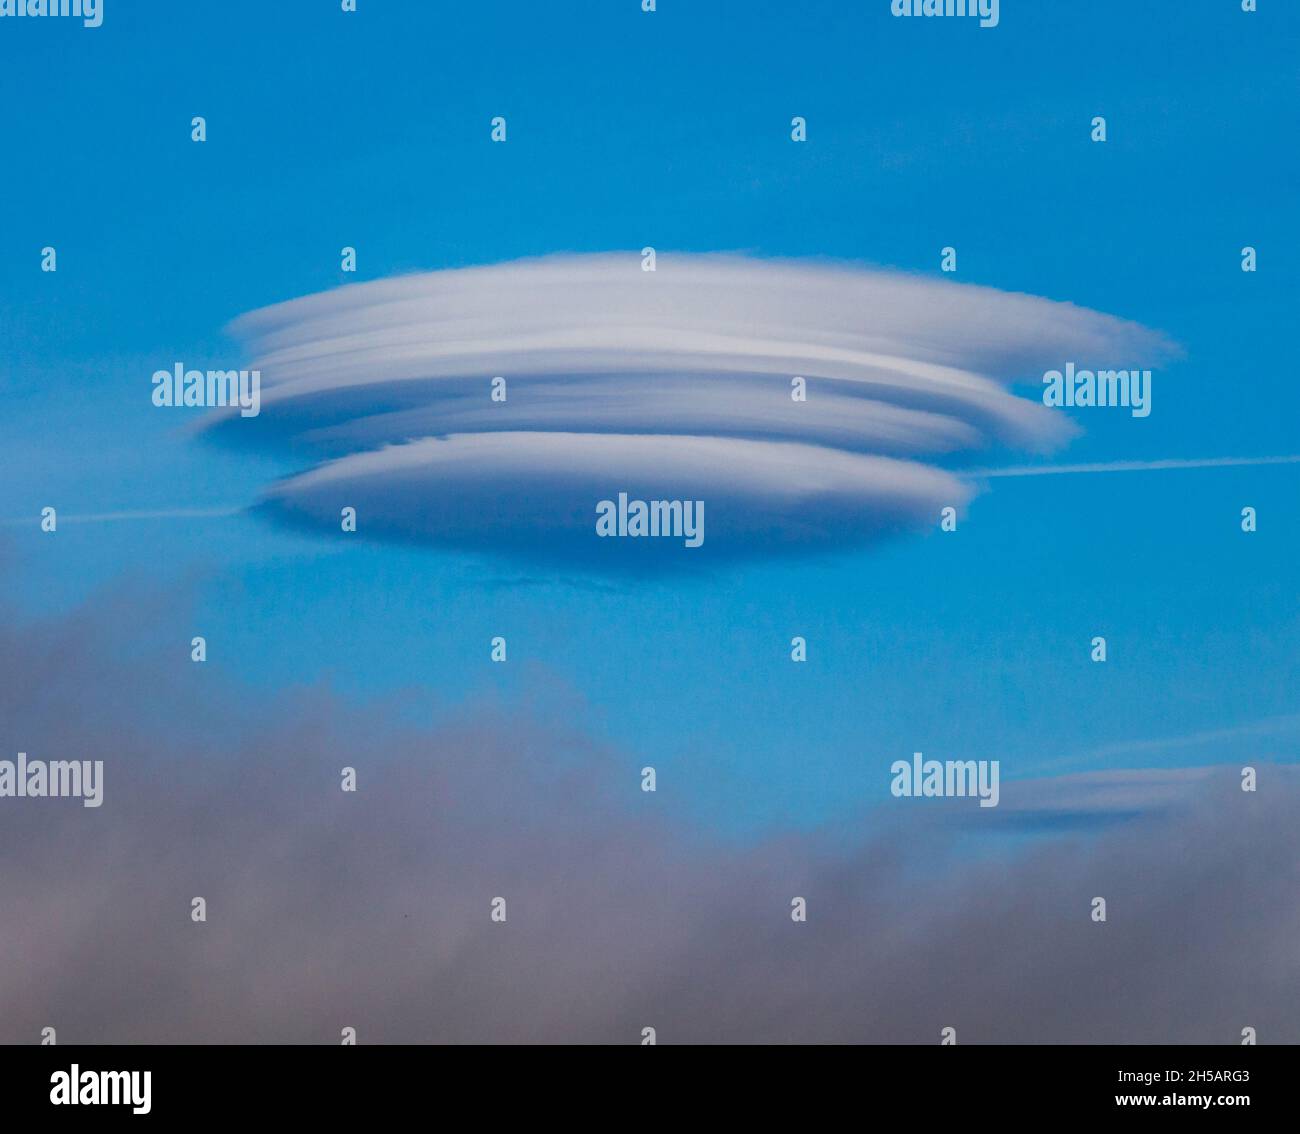 Lenticular cloud formation Stock Photo